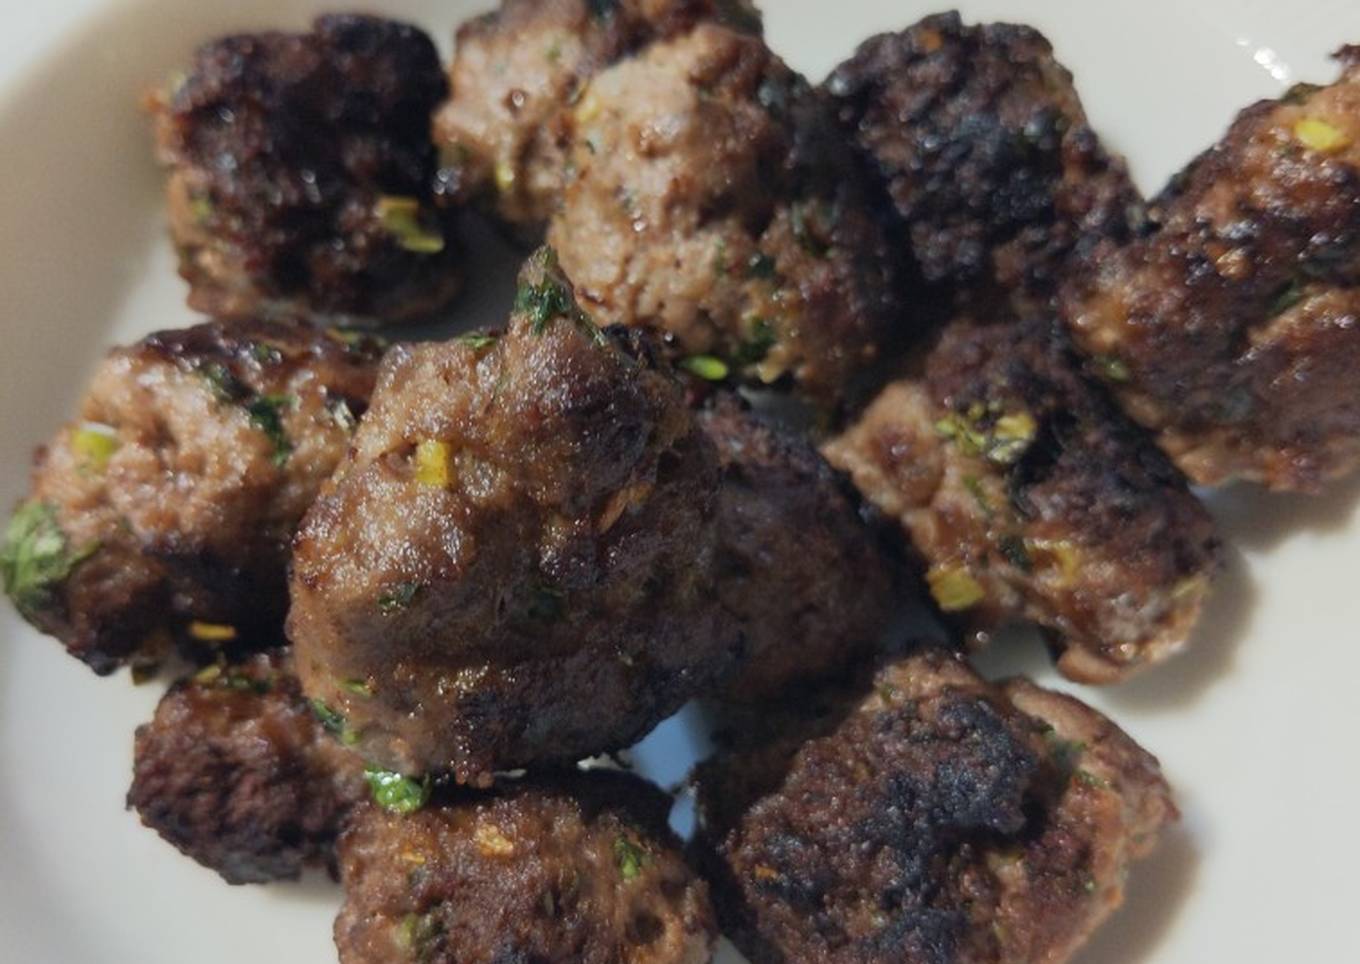 Quick and easy meatballs